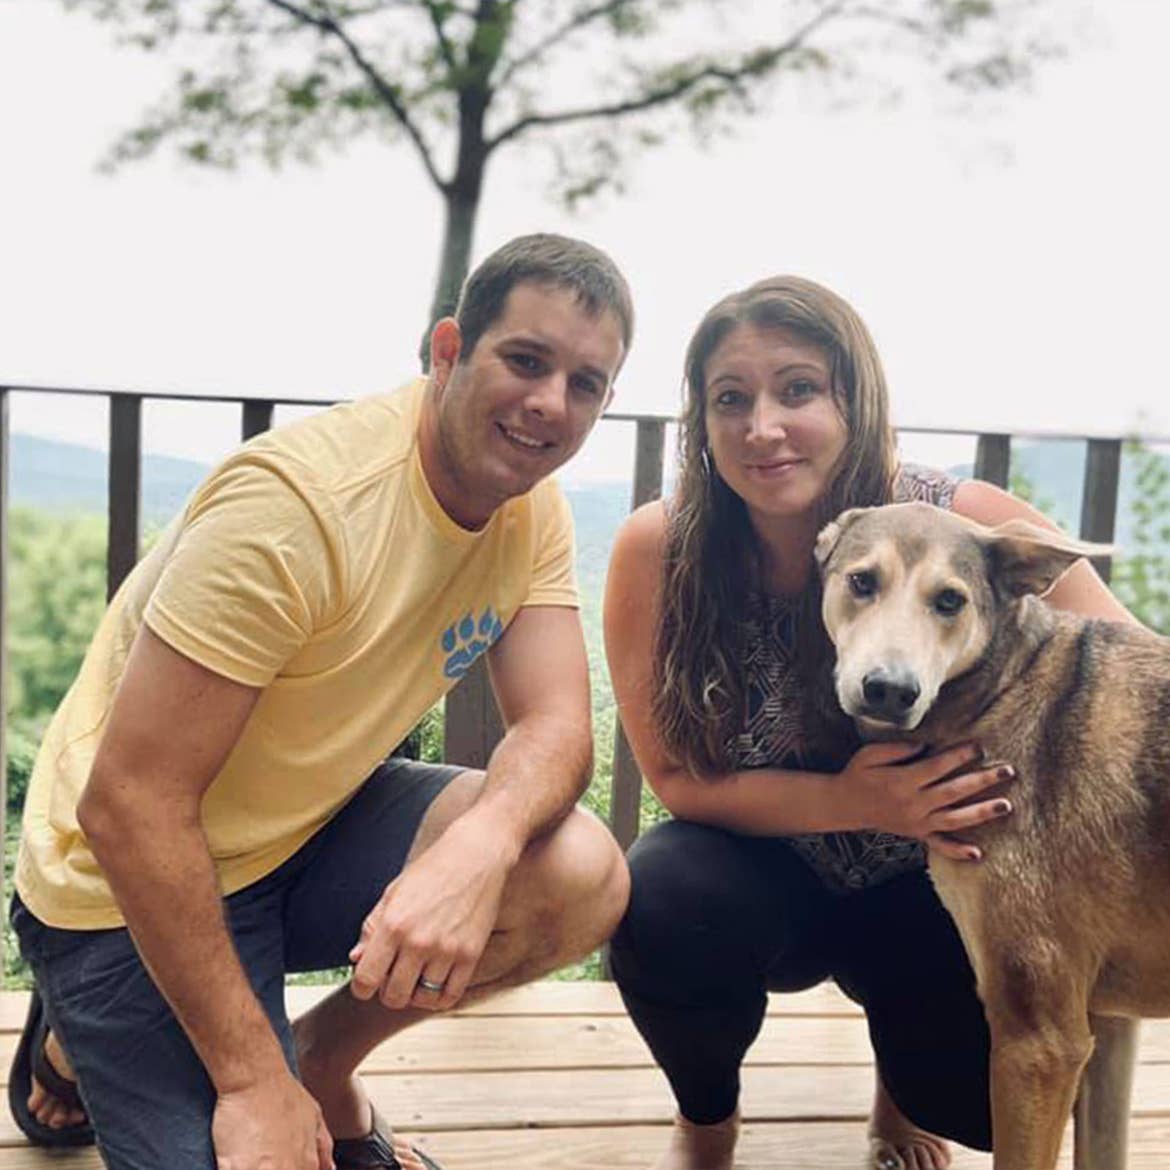 Featured Contributor, Tori Ferrante (right) and her husband (left) enjoy some quality time with their hound, Deagon.